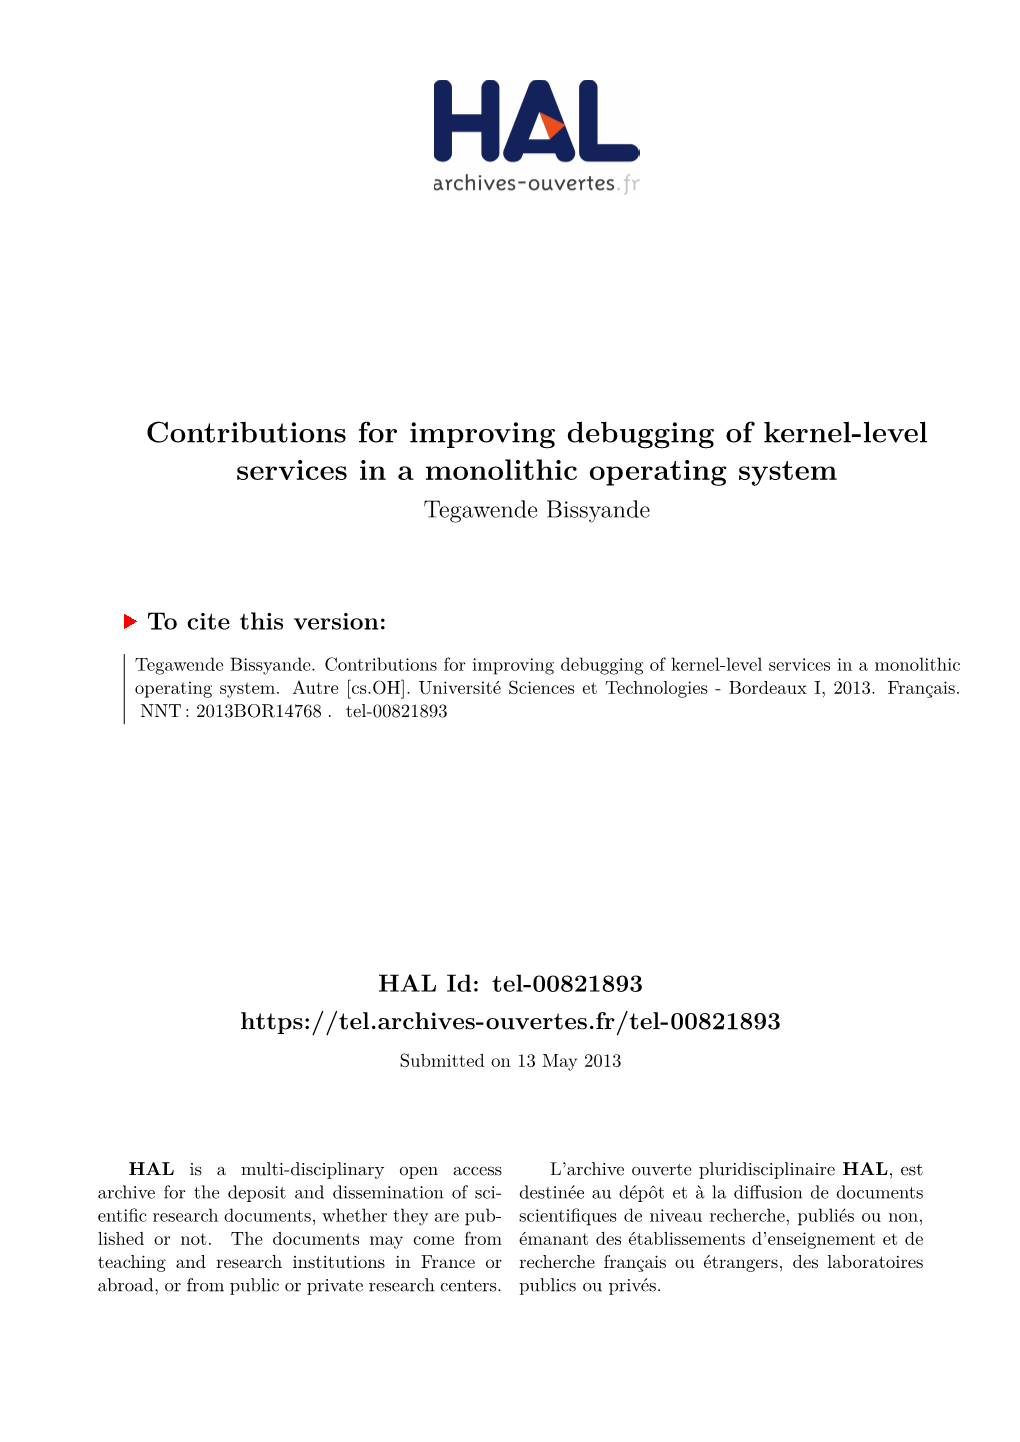 Contributions for Improving Debugging of Kernel-Level Services in a Monolithic Operating System Tegawende Bissyande